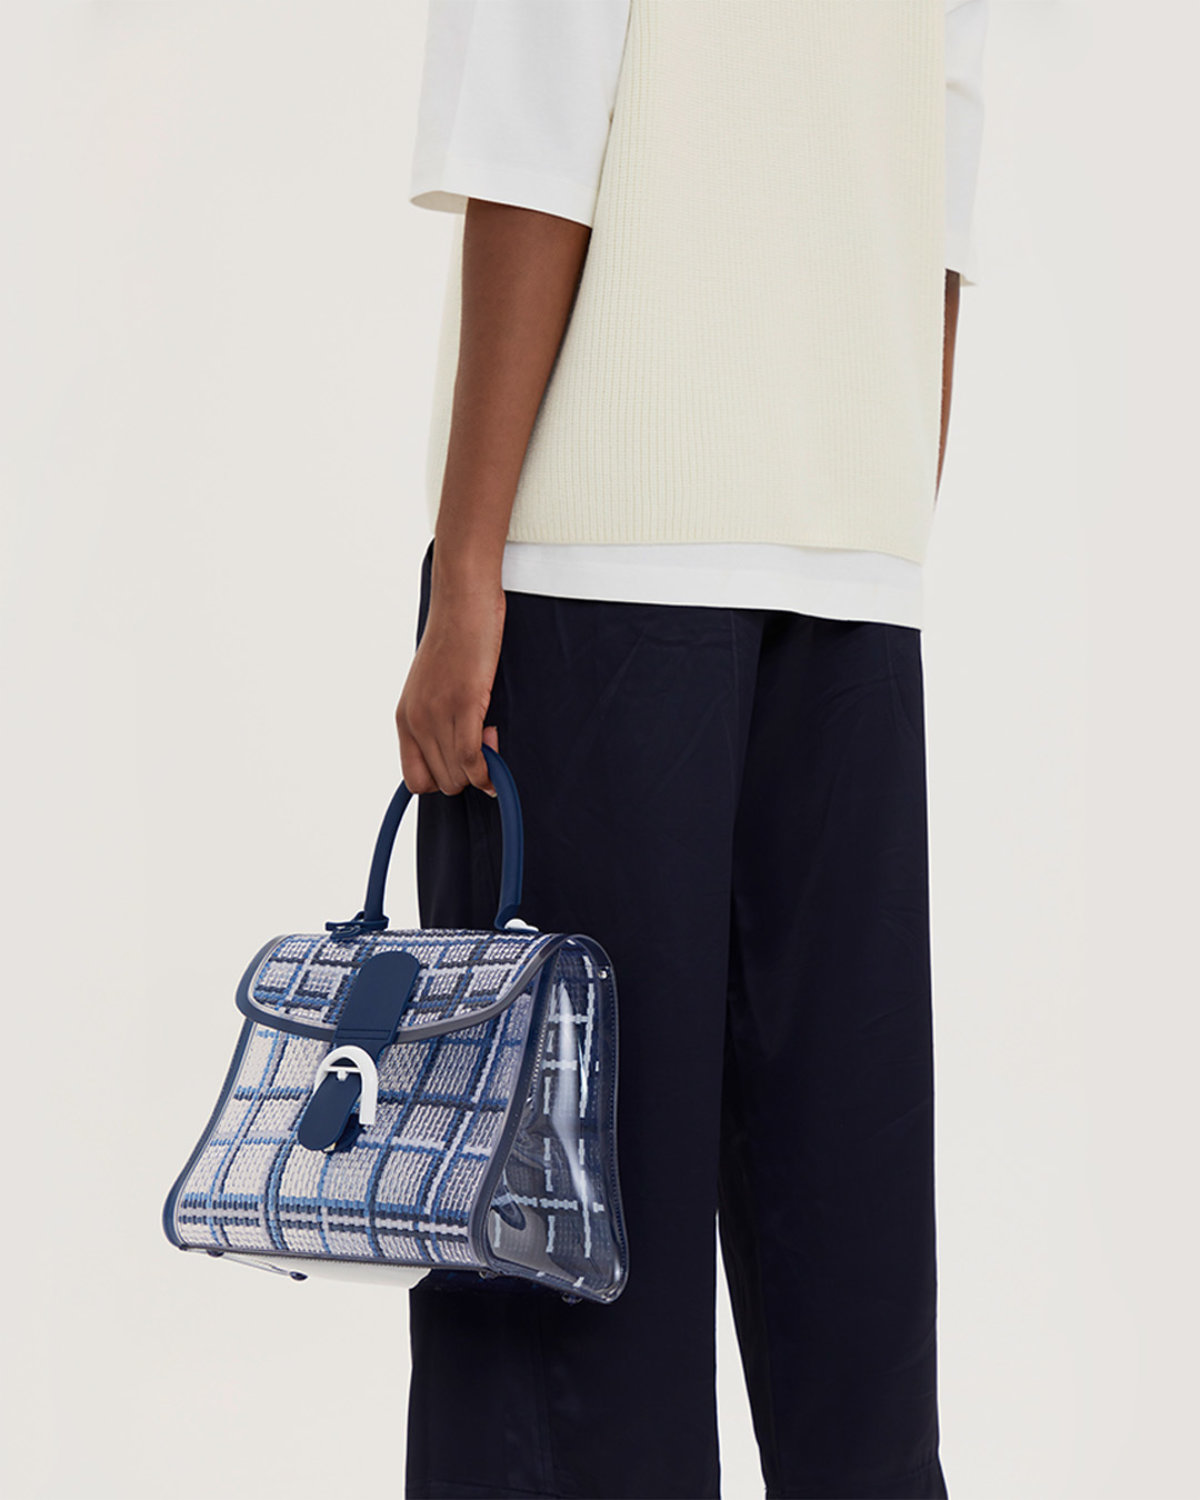 Delvaux: Delvaux Launches Its New 'Cool Babies' - Luxferity